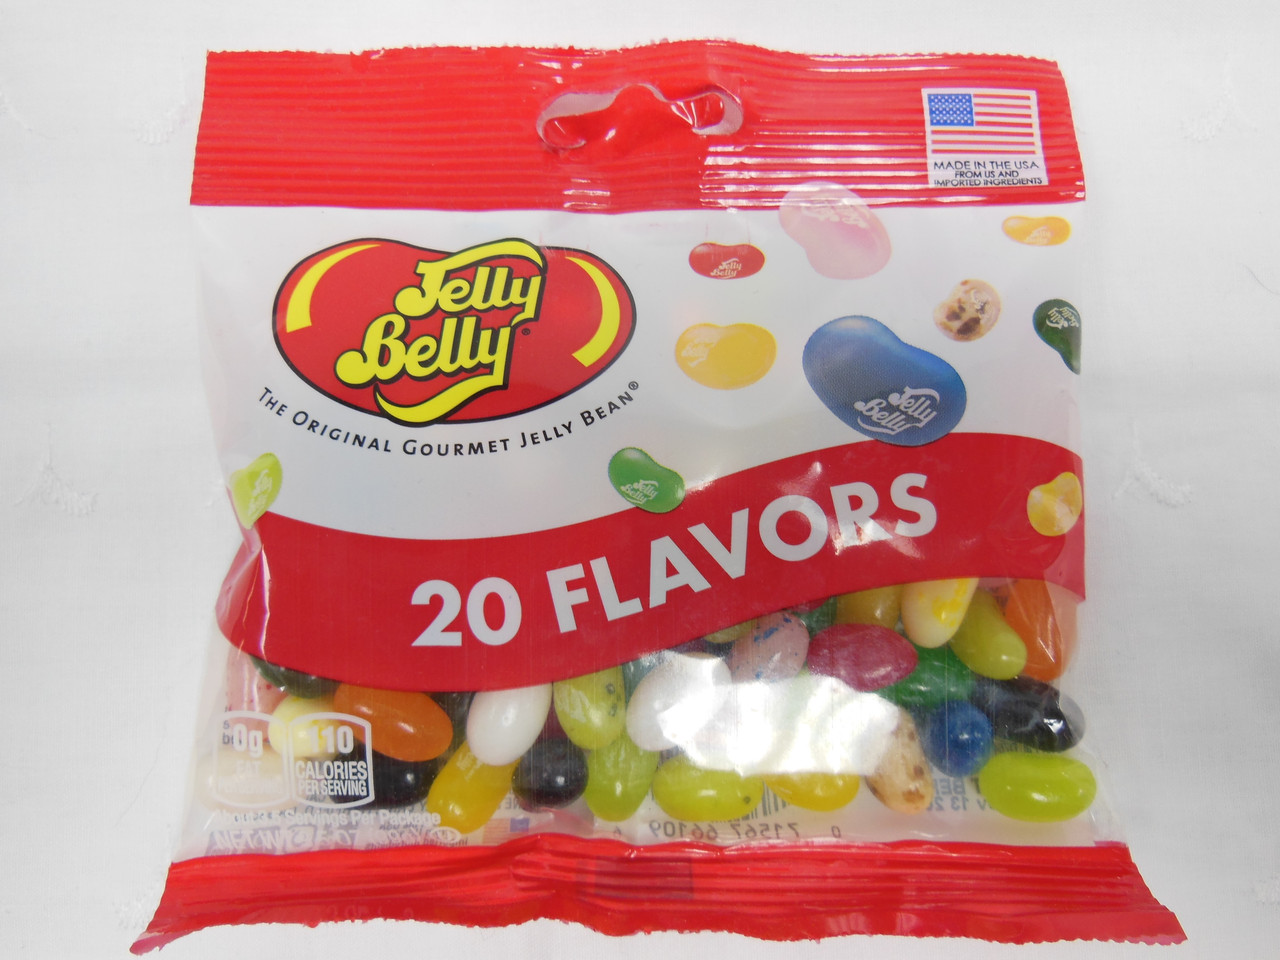 Jelly Belly Bean Boozled Jelly Beans, 3.5 oz, 6 count